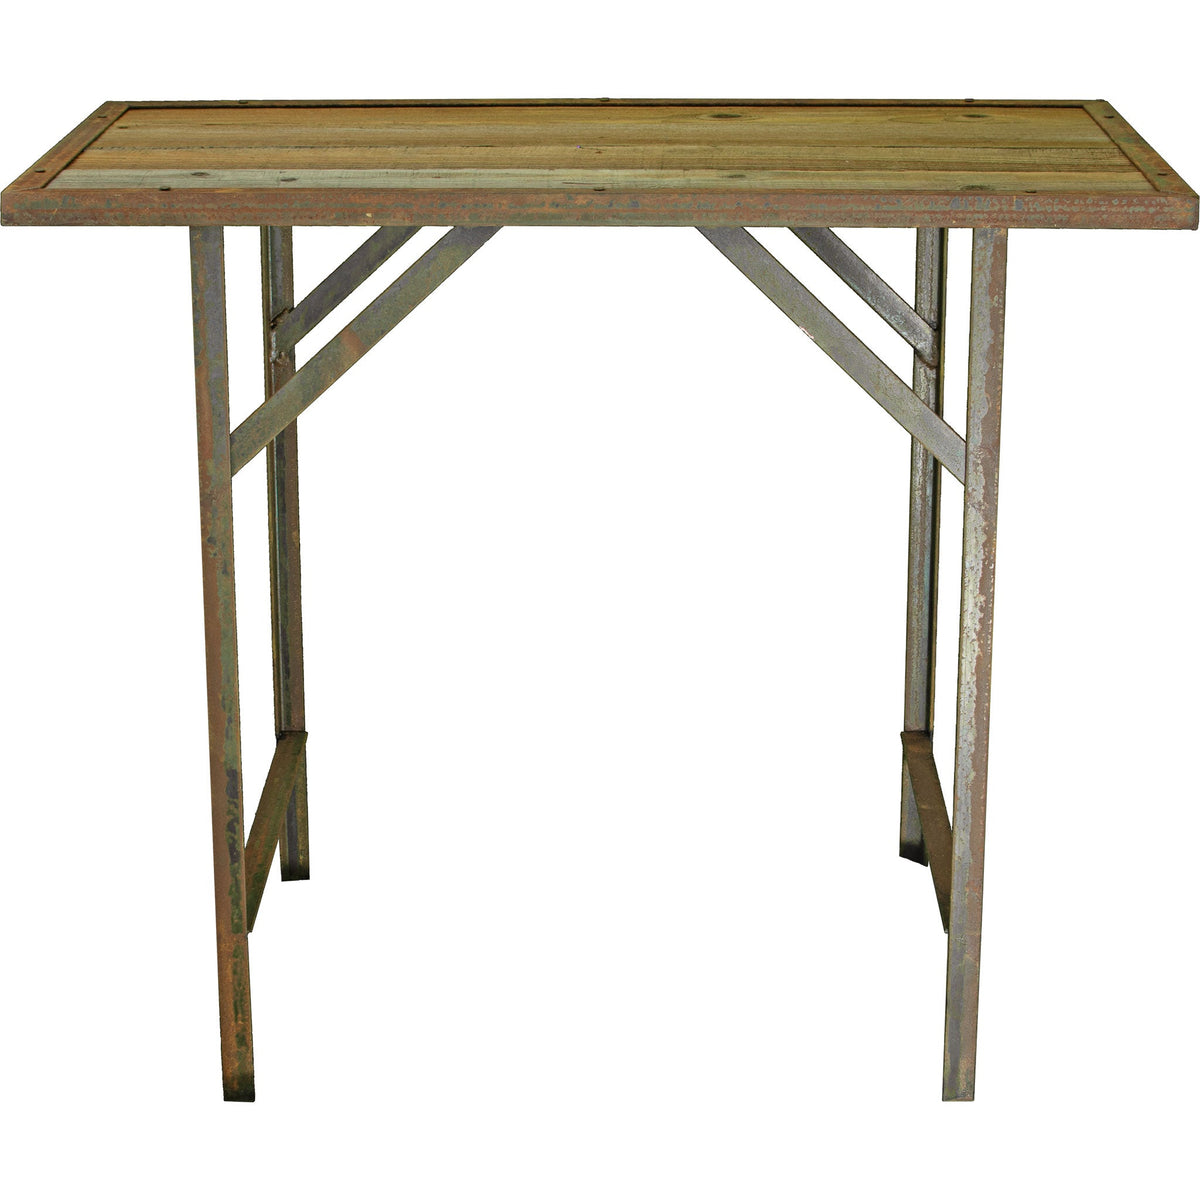 Lee Display's Rustic Outdoor Patio Work Table    Built by Lee Display & Made in the USA!  Made from repurposed redwood and a patina-finished steel frame.  Comes fully assembled.